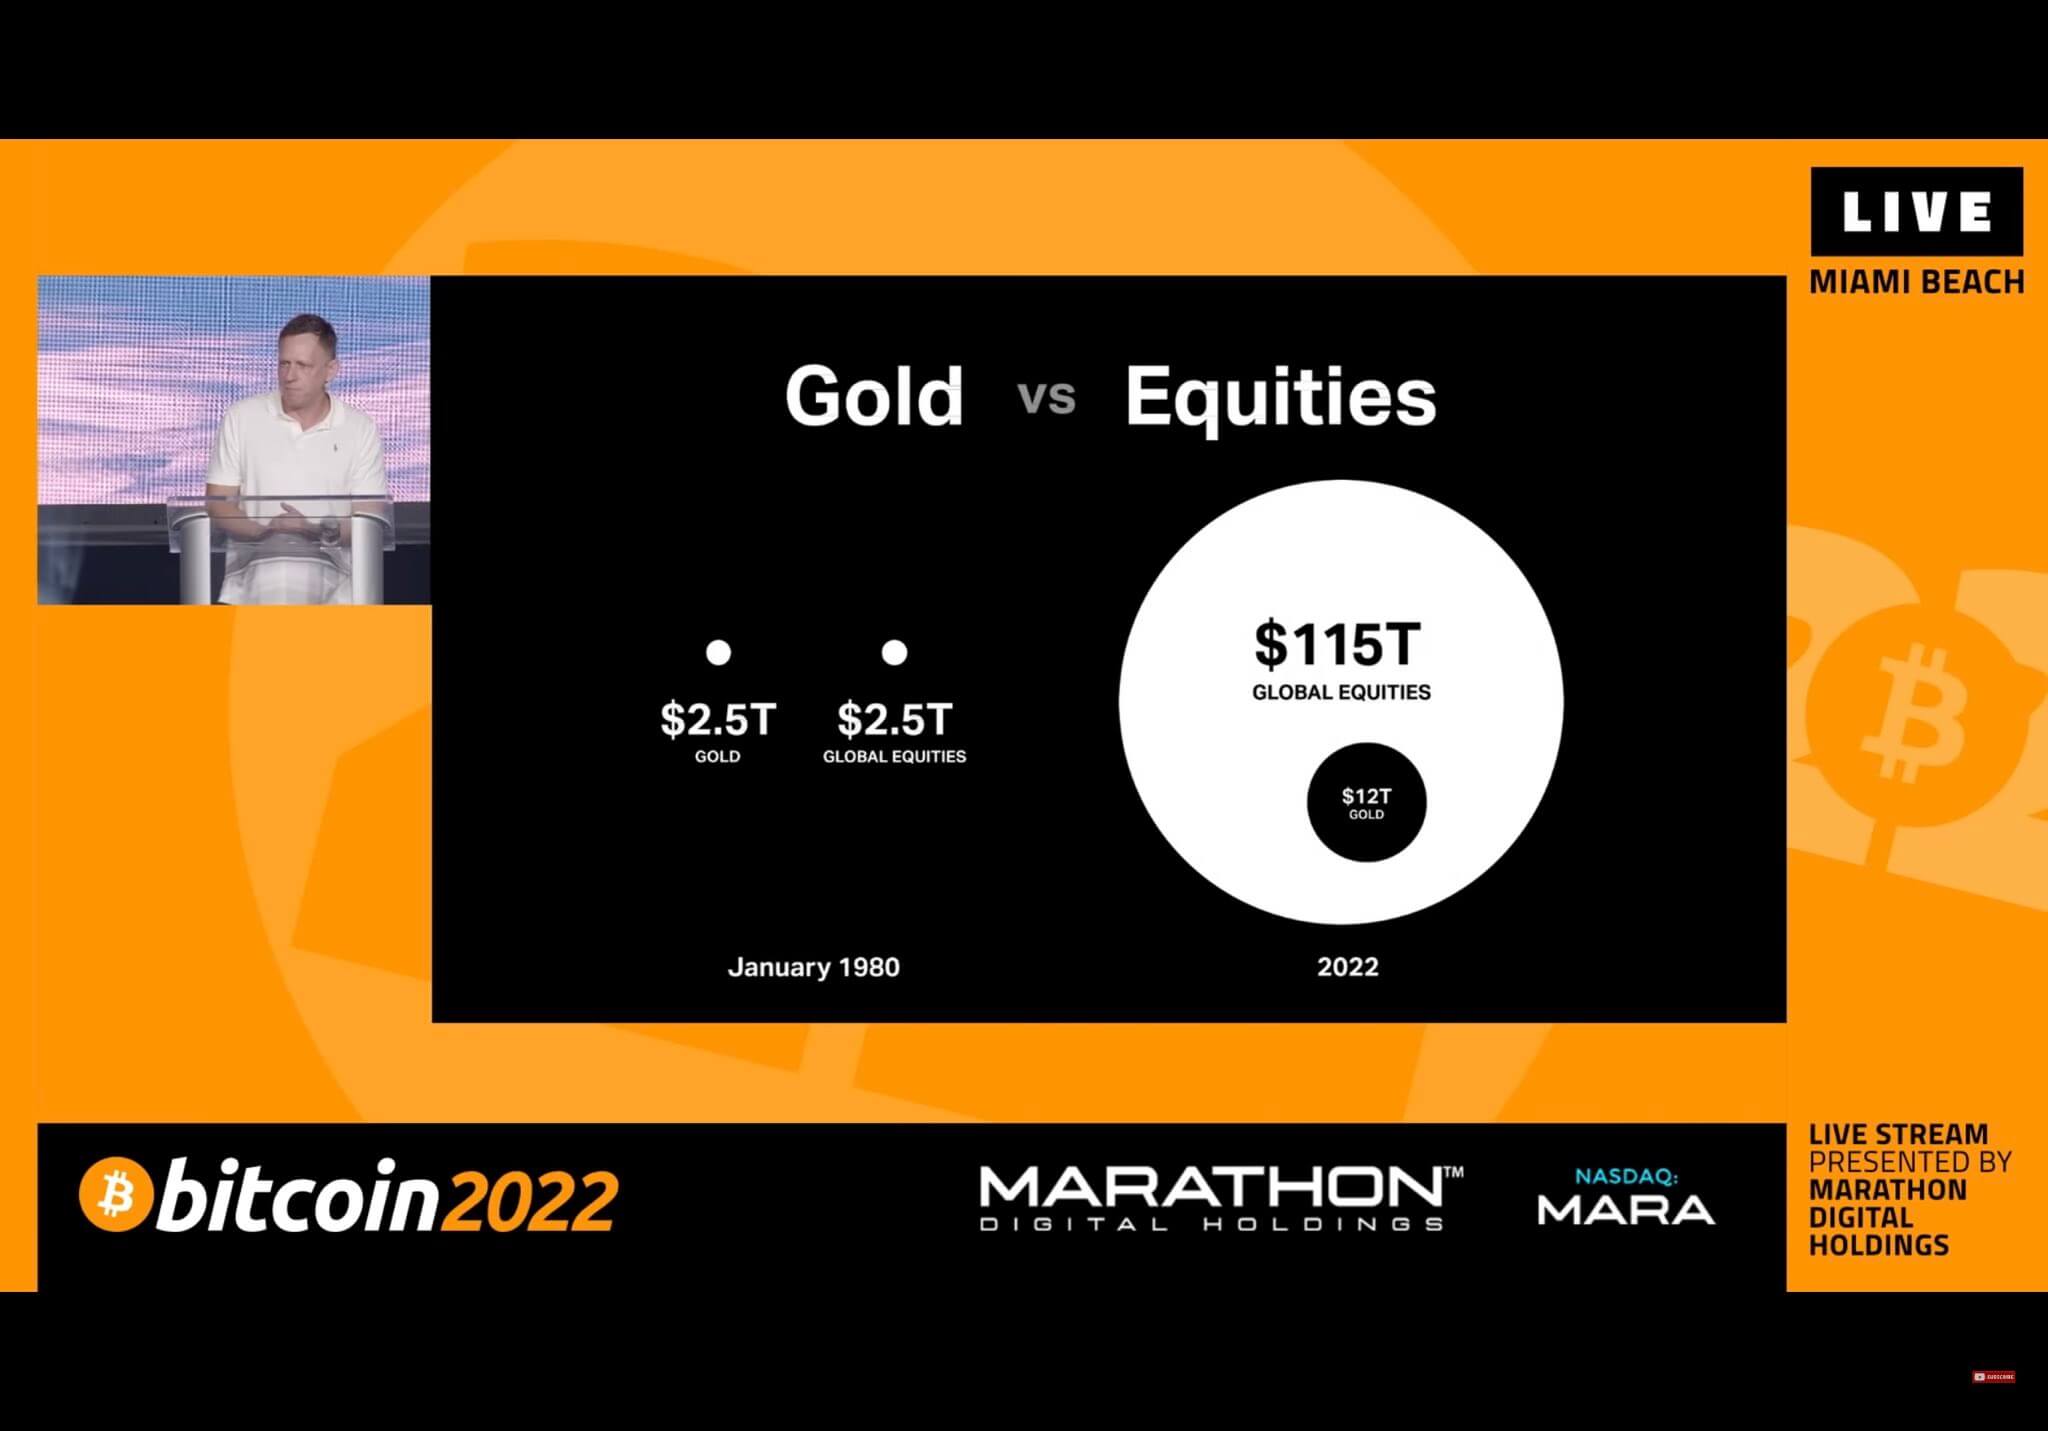 Gold vs. Equities (Source: Peter Thiel Slide from Bitcoin 2022 Conference)